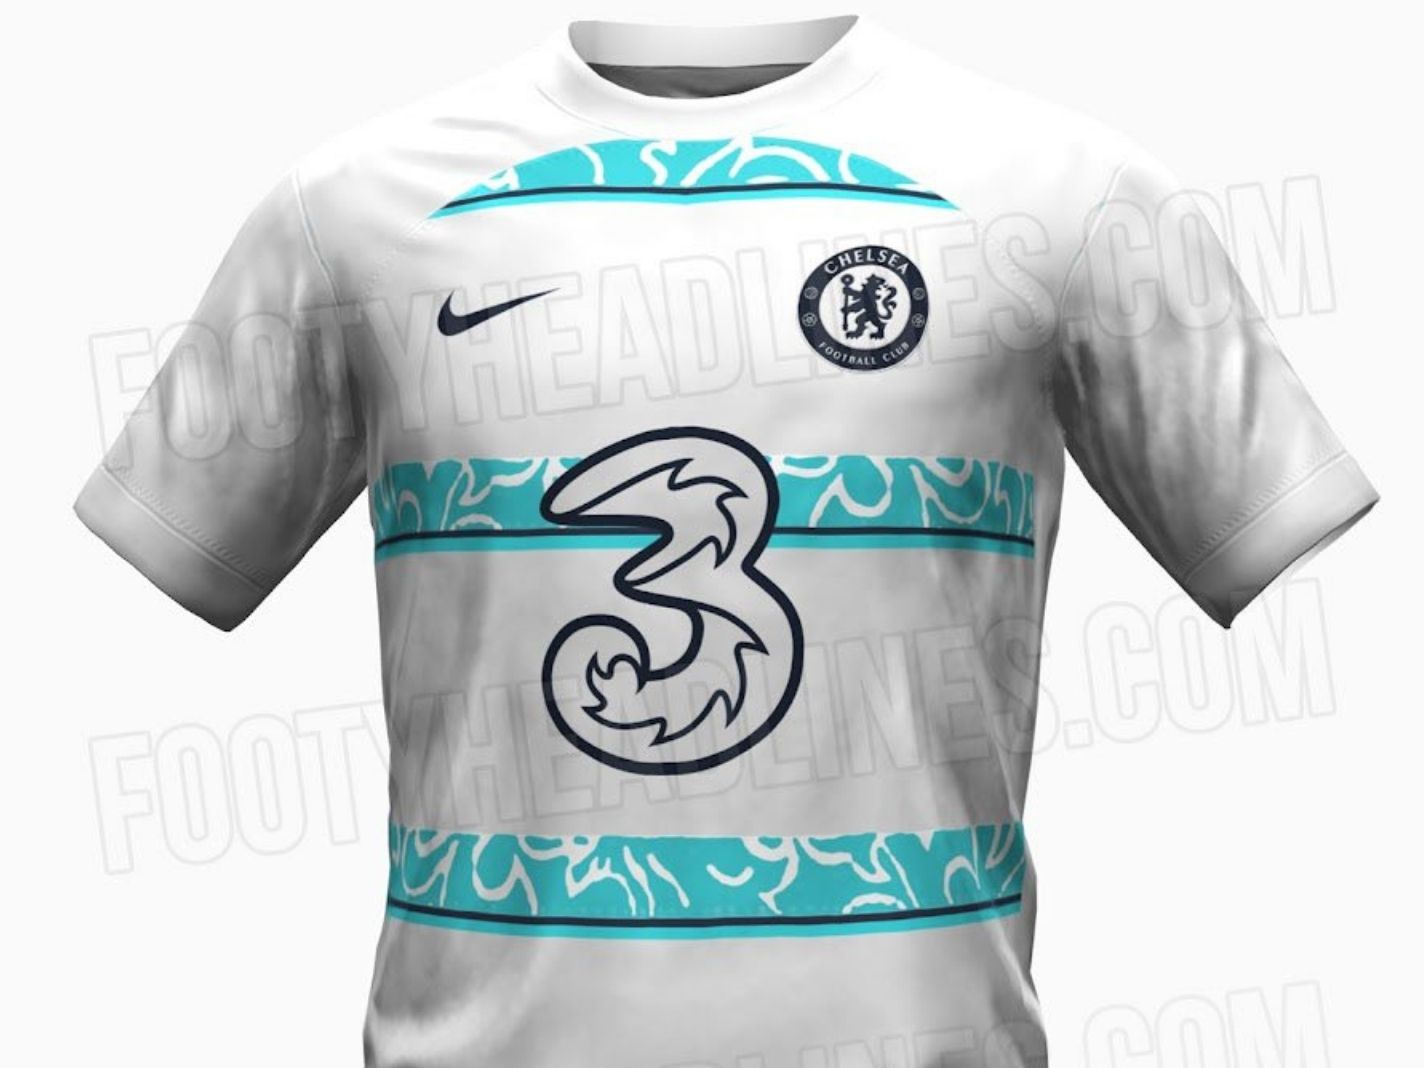 Bring Back Adidas – Chelsea fans react to leaked away kit for 22/23 season